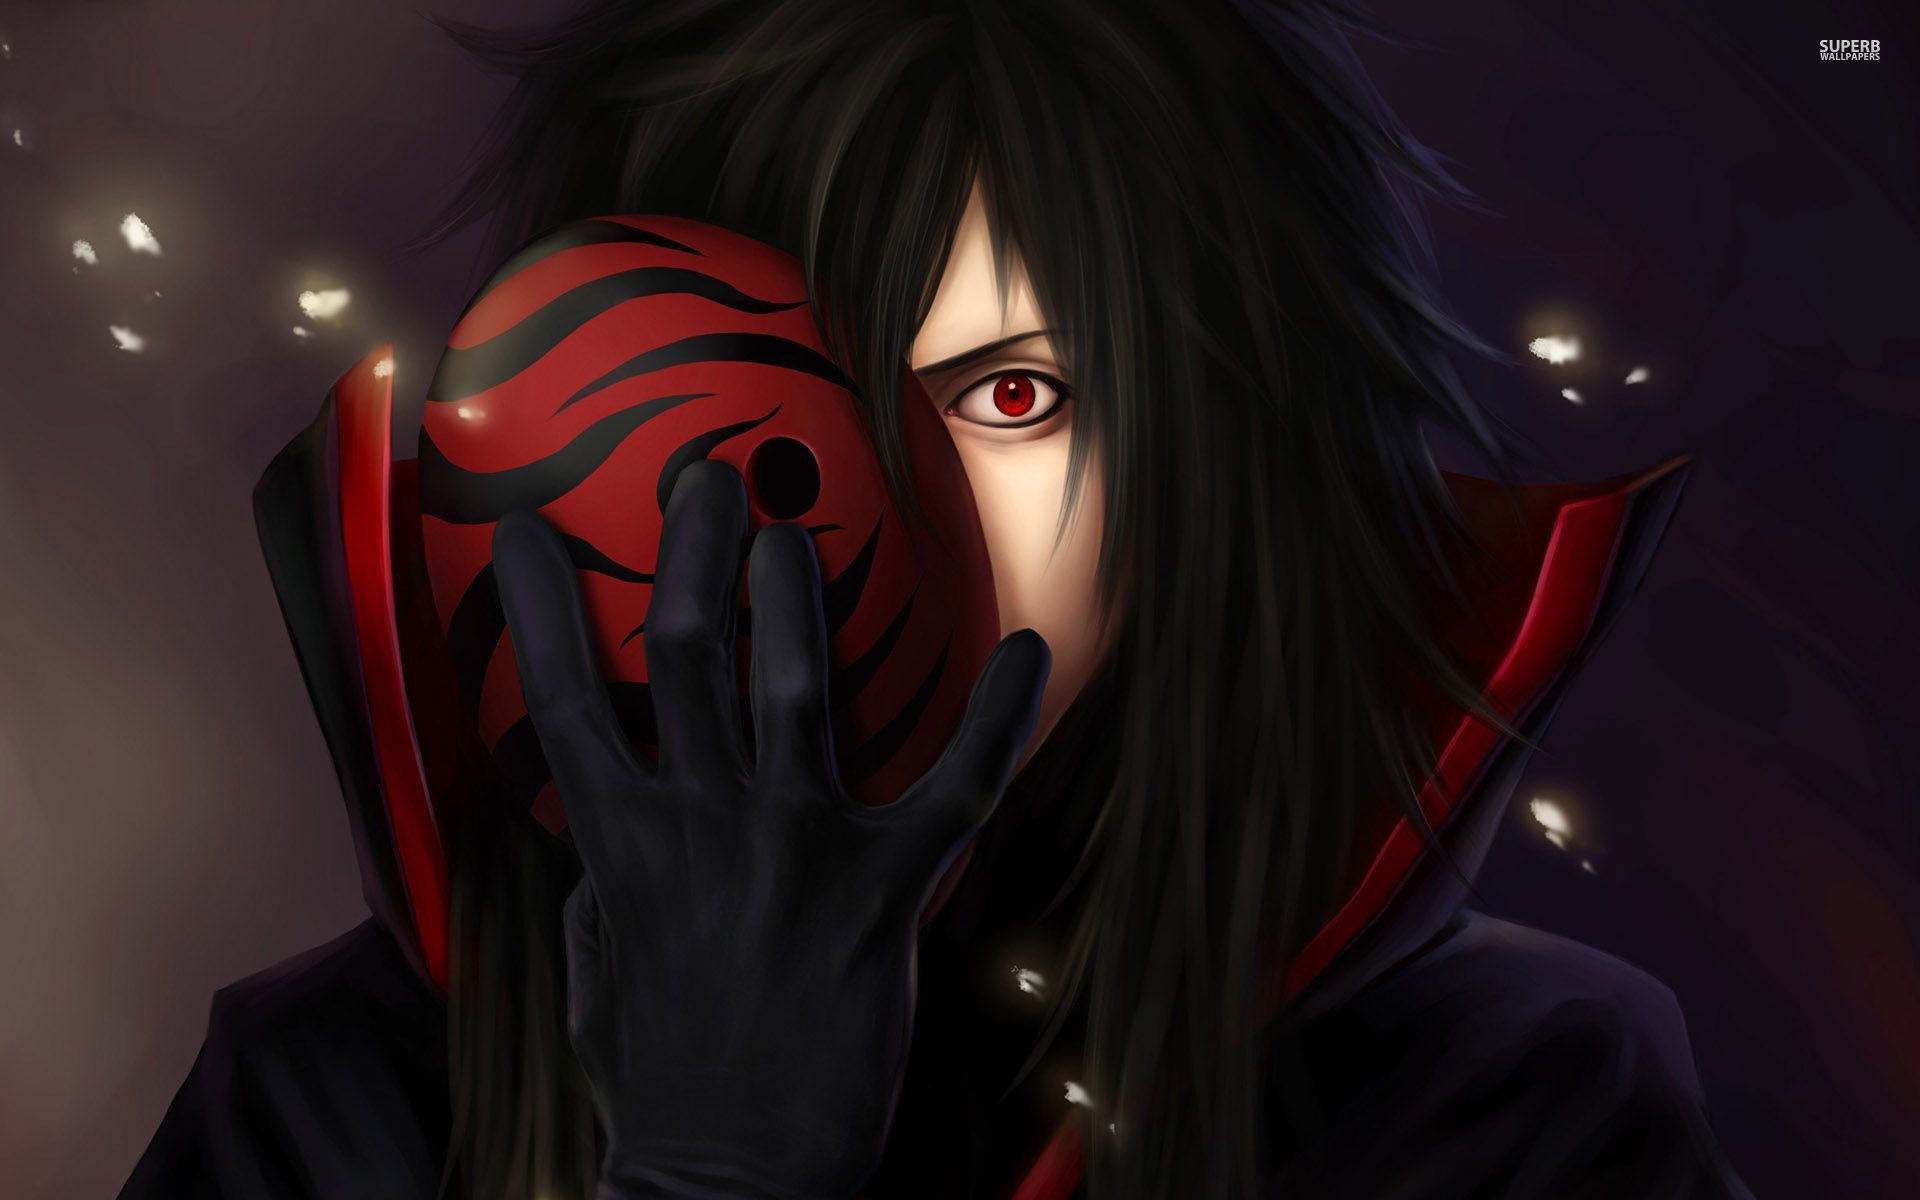 A37 Naruto Madara Uchiha anime HD Desktop background images pictures wallpapers downloads